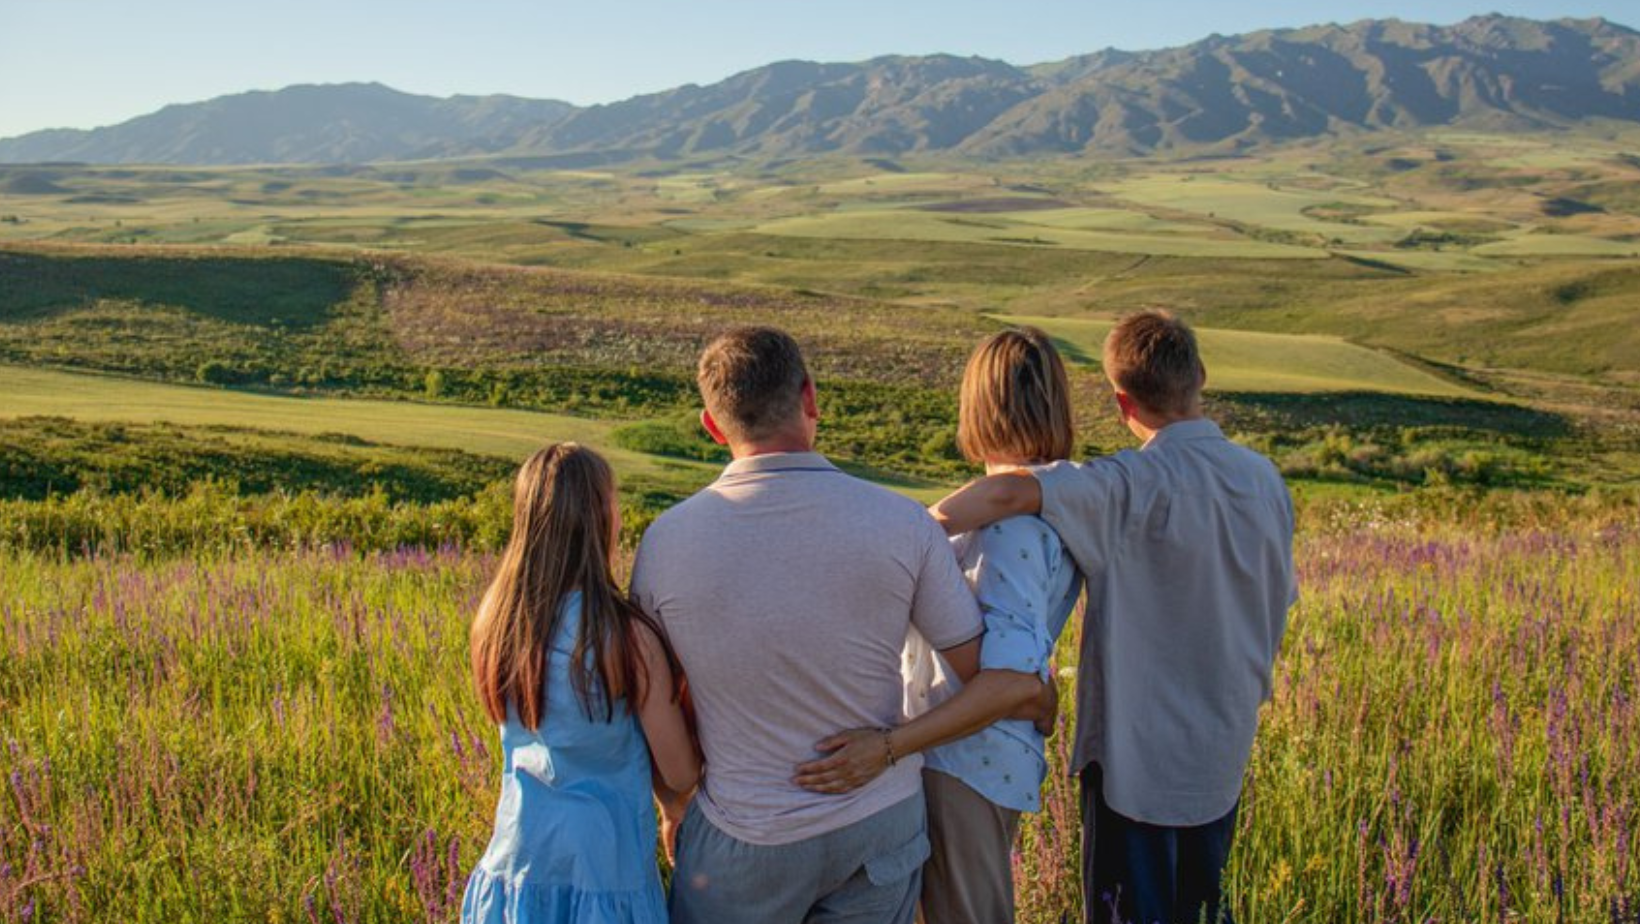 A Boise, Idaho, family is standing in the middle of a field with the foothill mountains in the background.